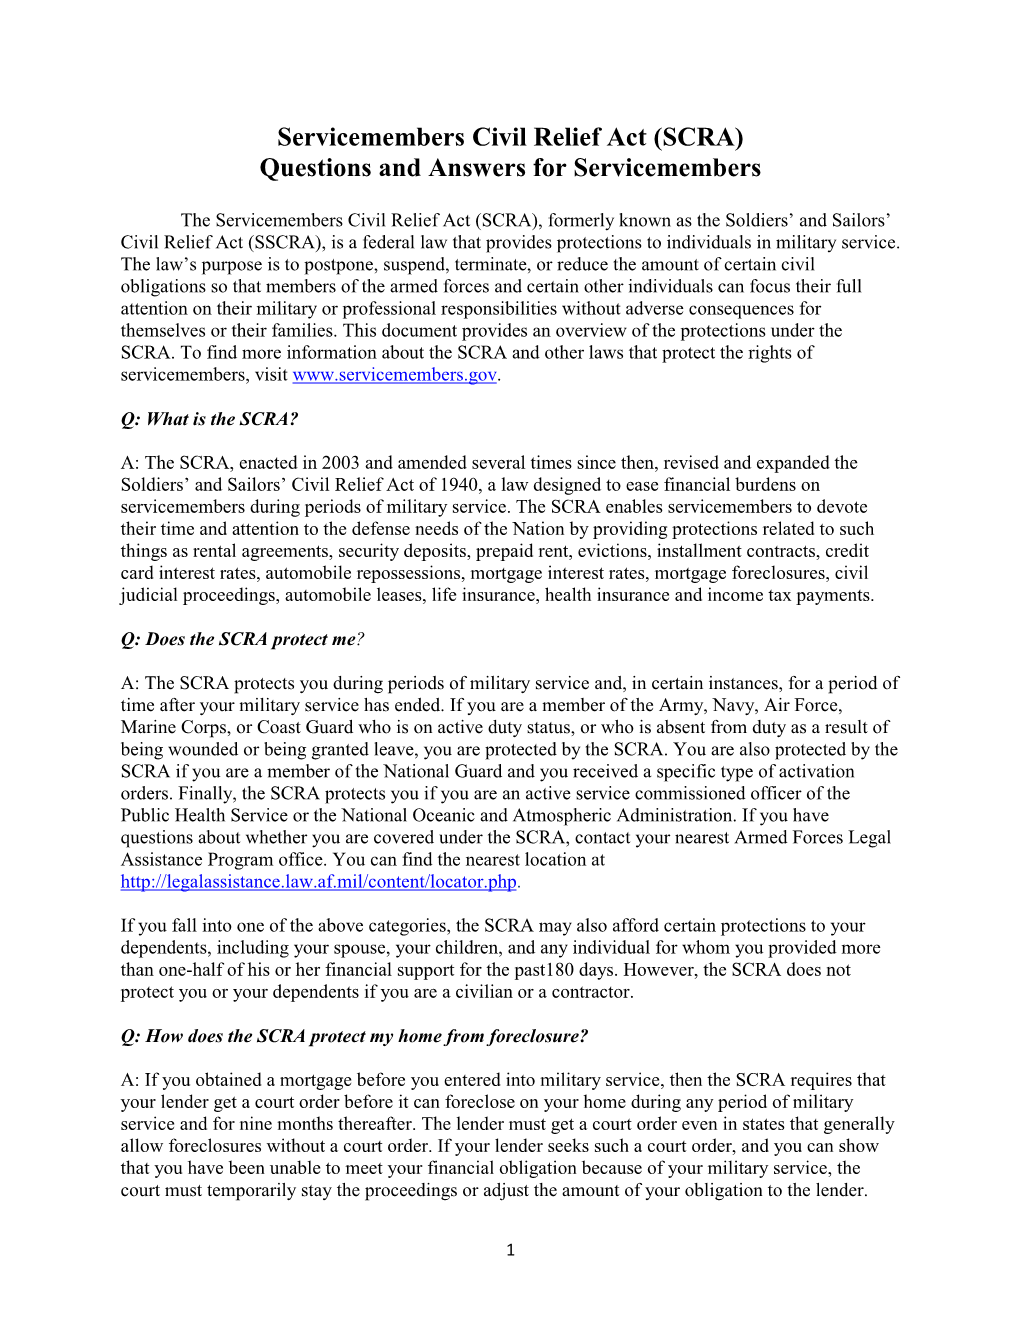 Servicemembers Civil Relief Act (SCRA) Questions and Answers for Servicemembers